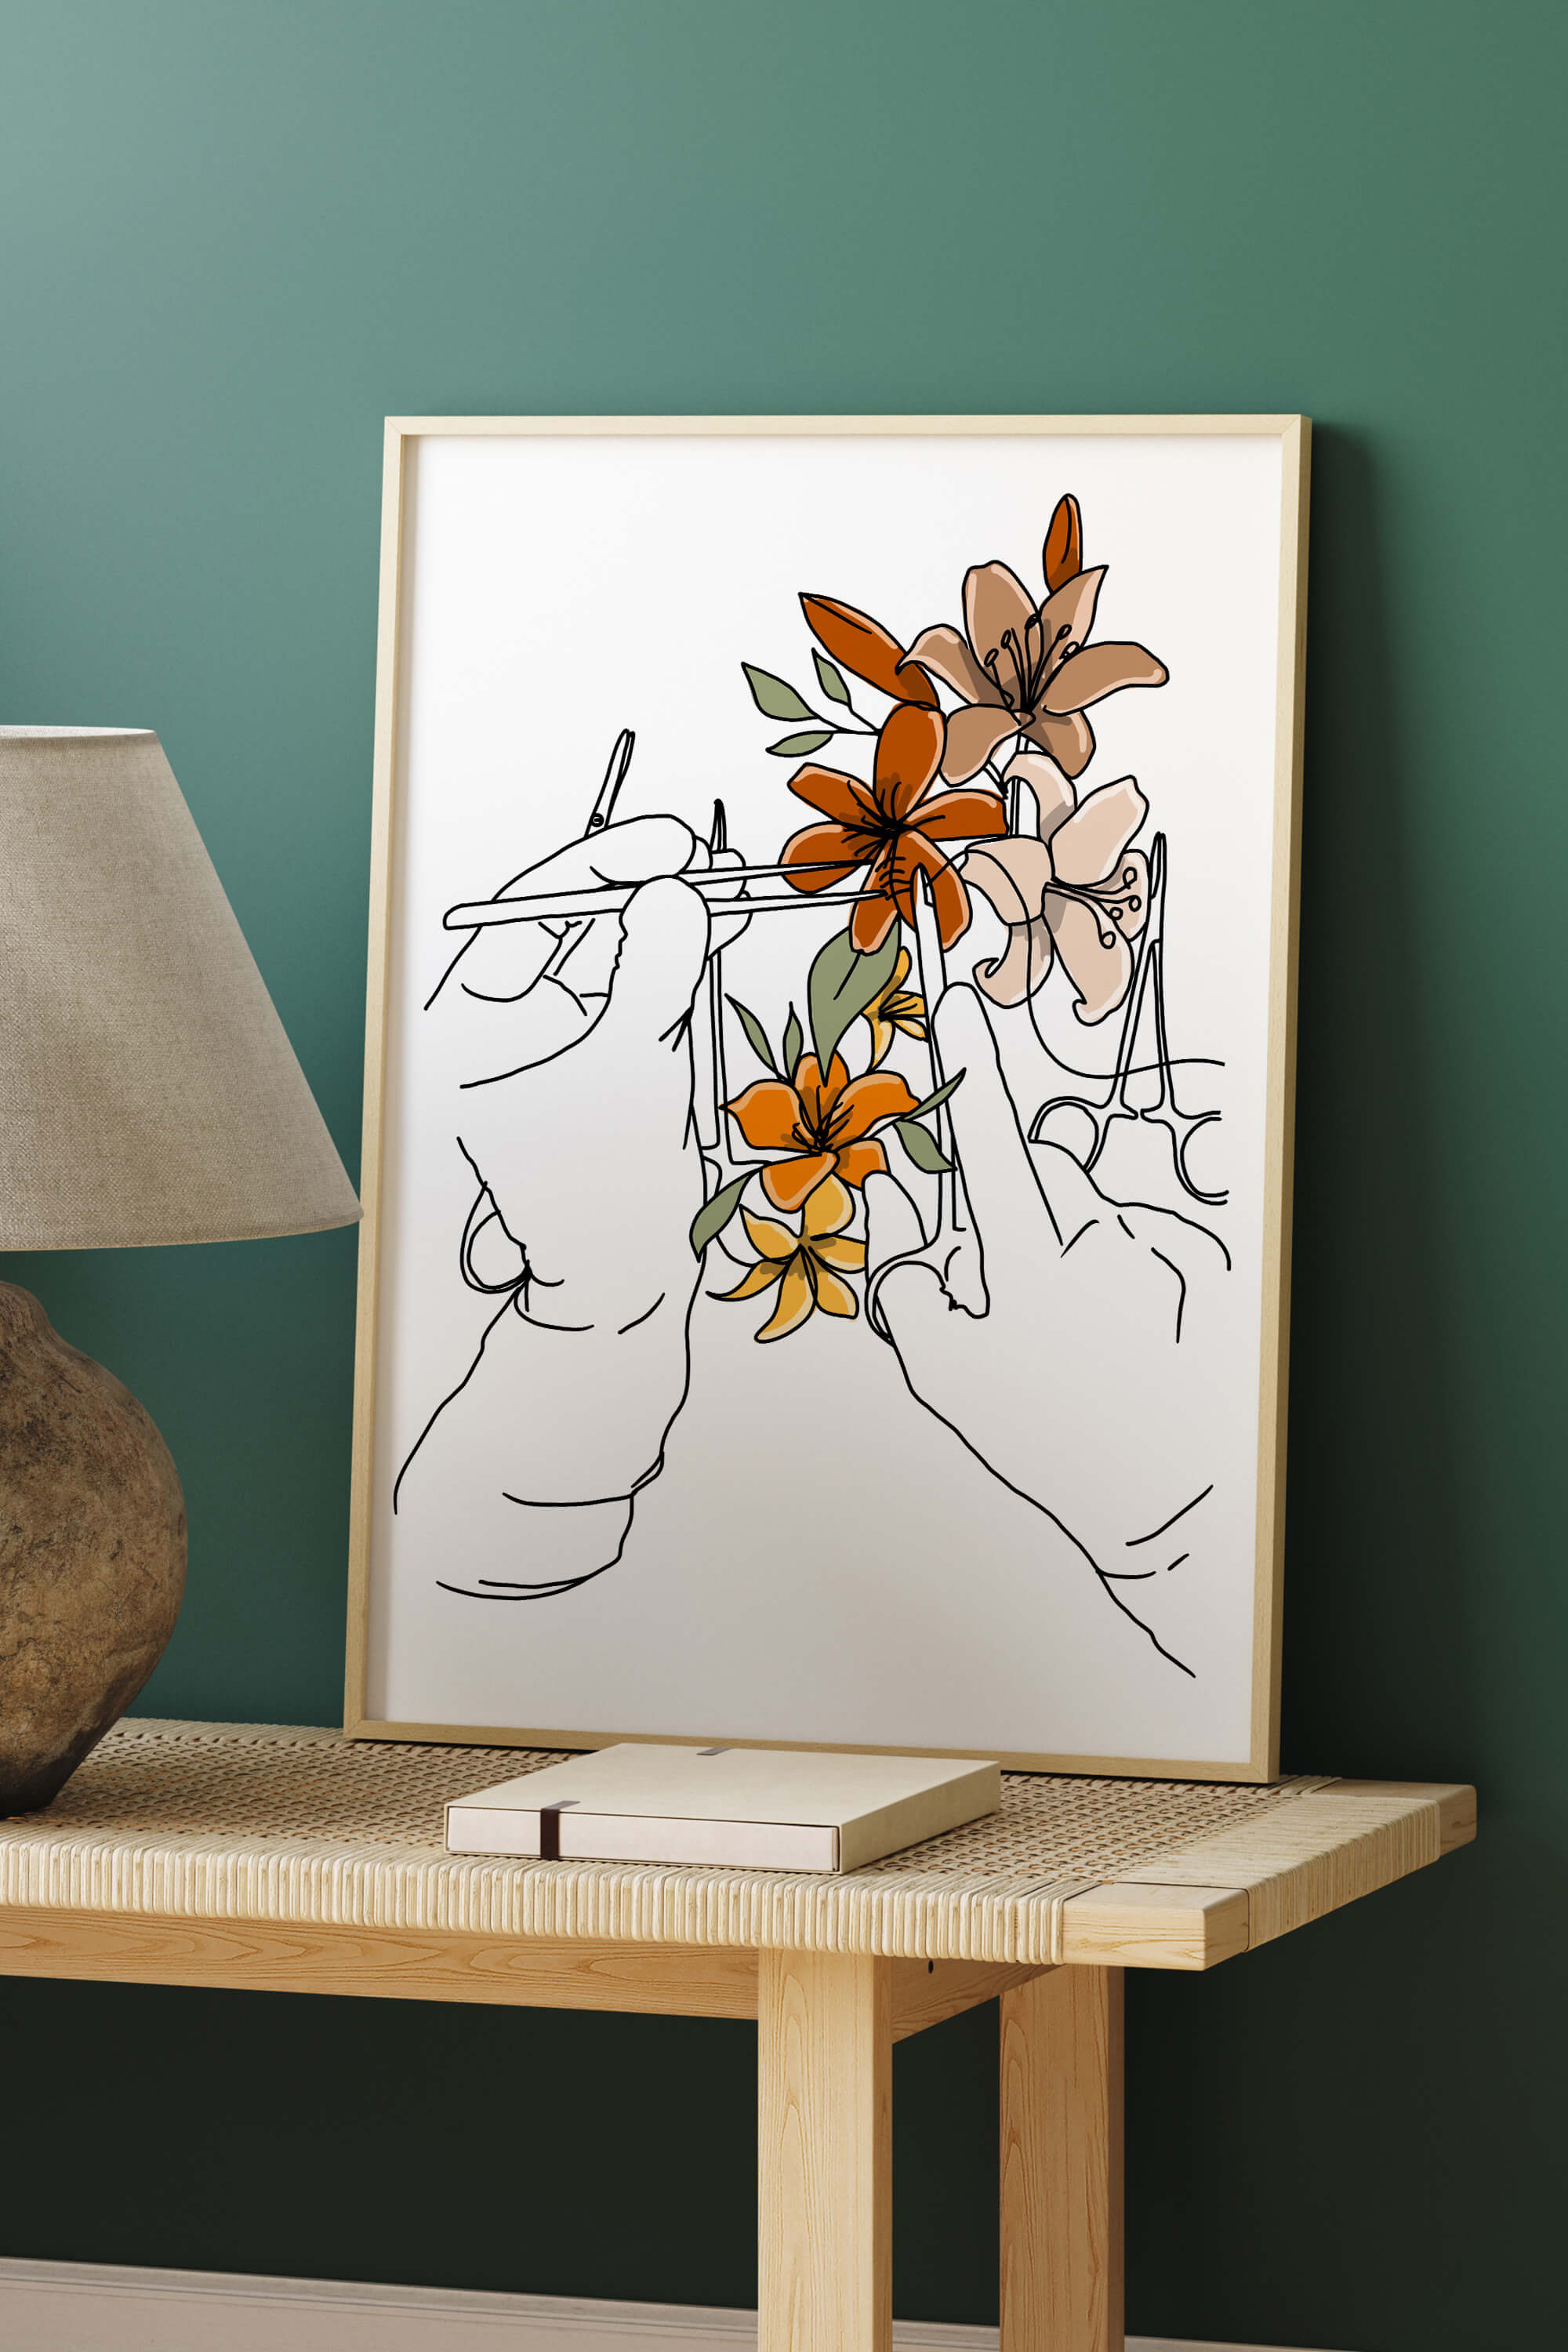 Own a unique piece of art that goes beyond aesthetics. This limited-edition art print is an experience in resilience and inspiration, combining the beauty of floral elements with the precision of surgical symbols. Elevate your surroundings and treat yourself to this exquisite work of healing art.